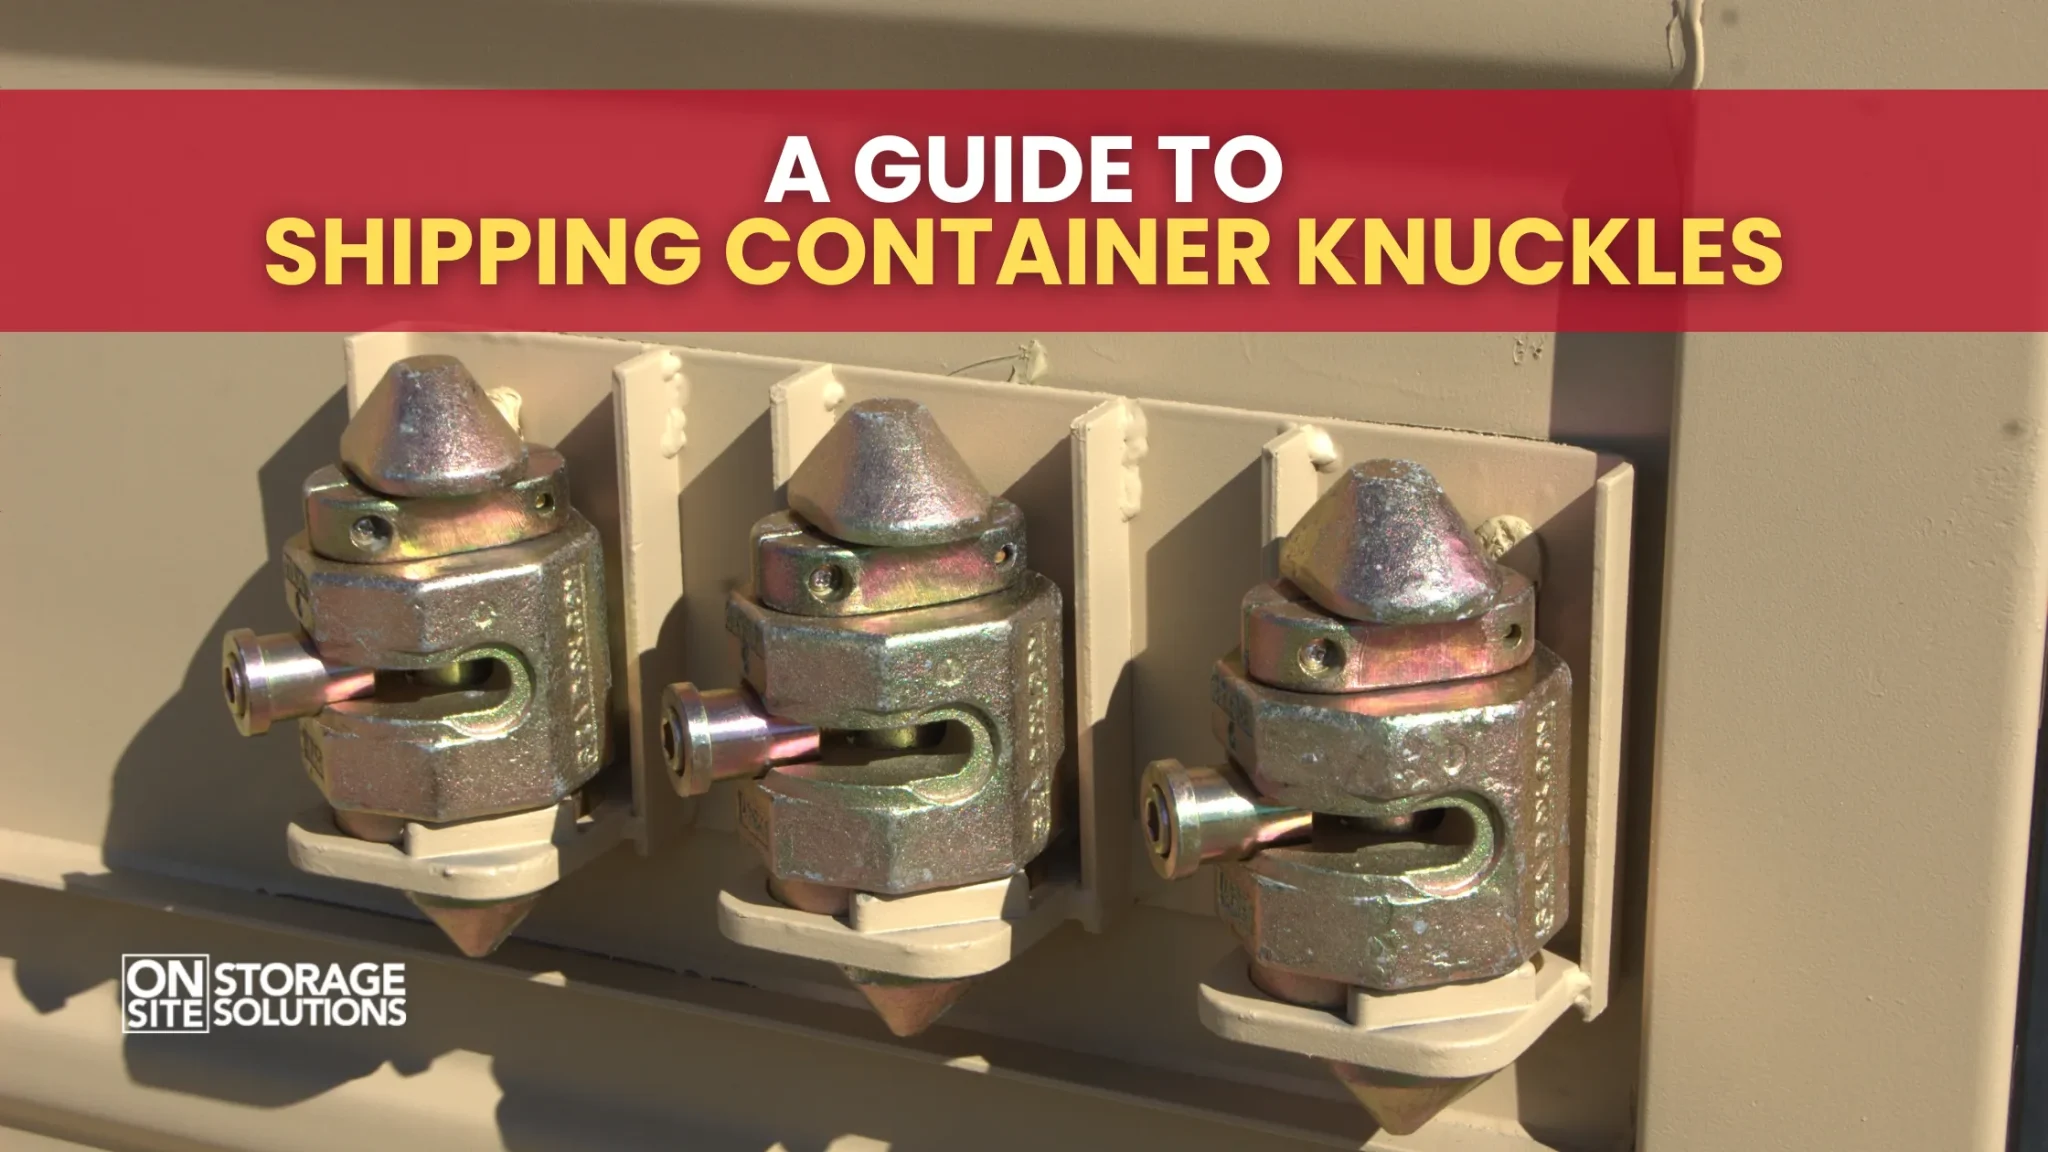 A Guide to Shipping Container Knuckles